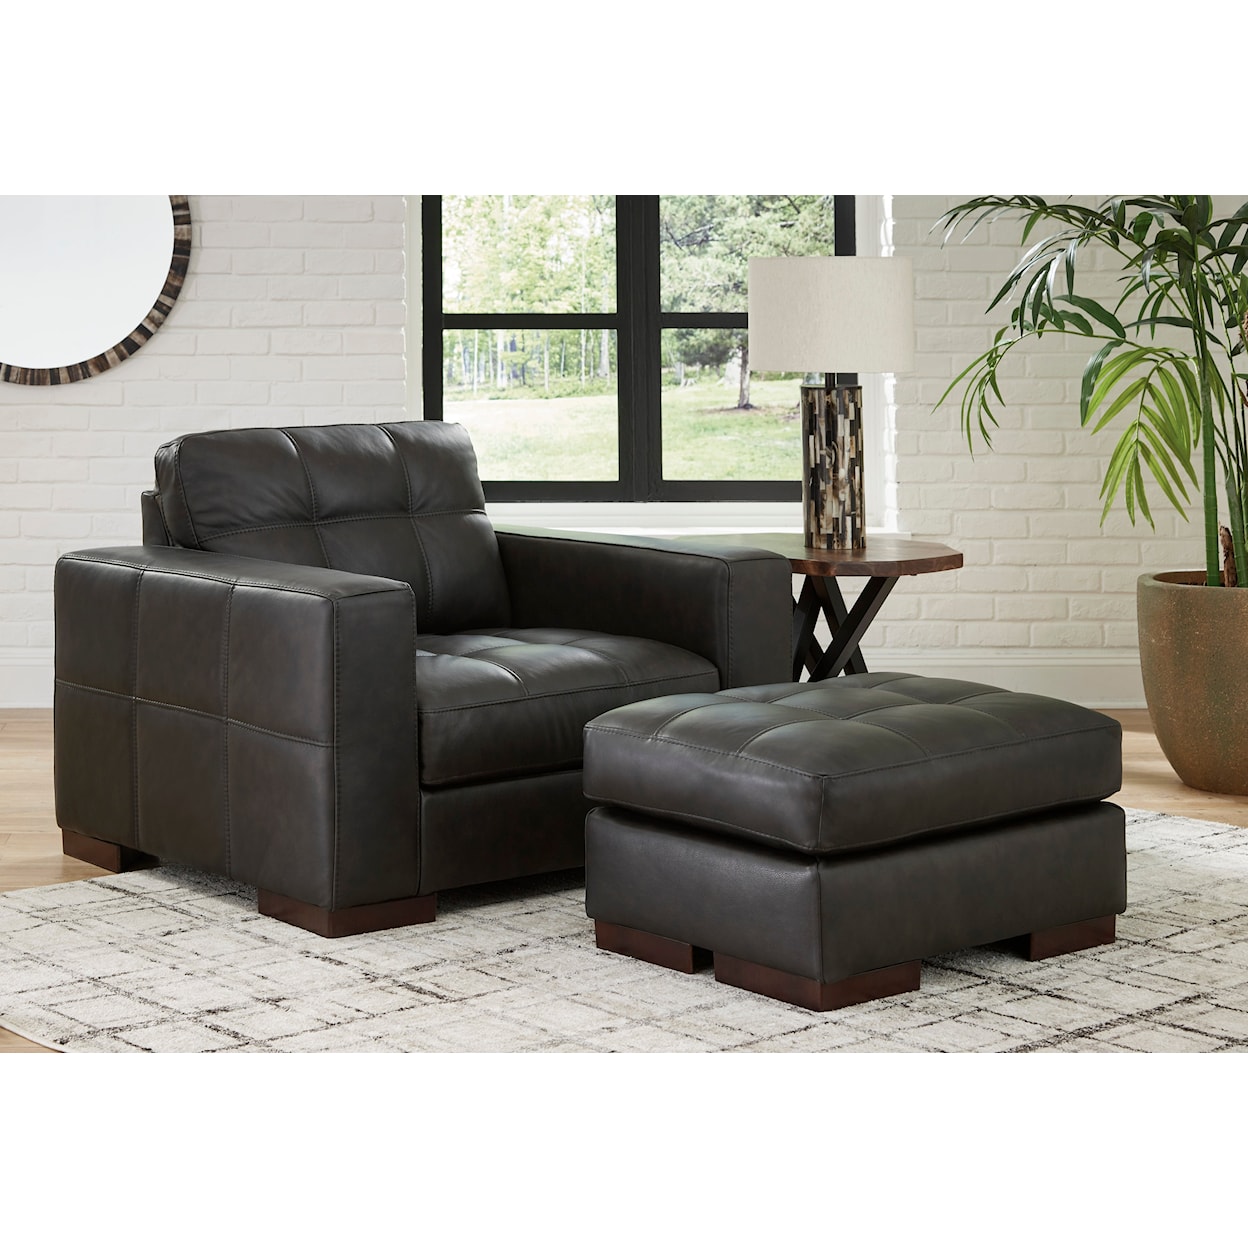 Signature Design by Ashley Furniture Luigi Oversized Chair and Ottoman